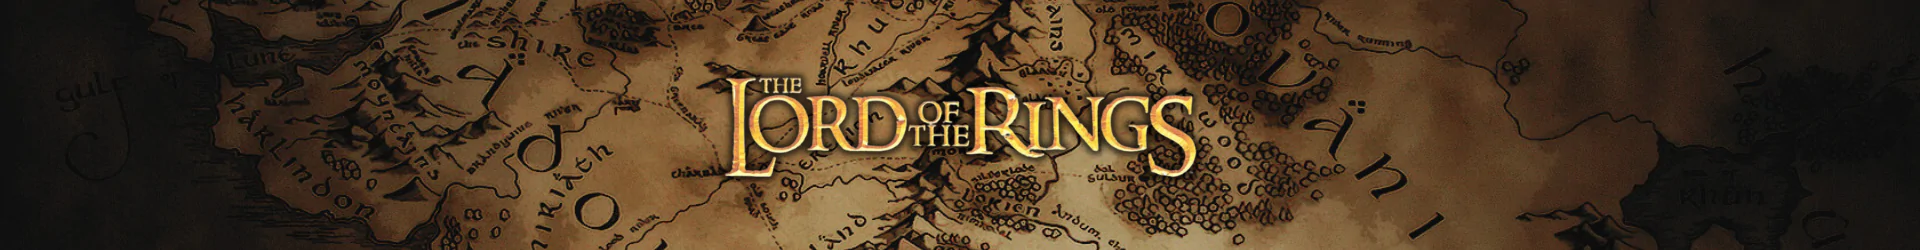 Lord of the Rings necklaces banner